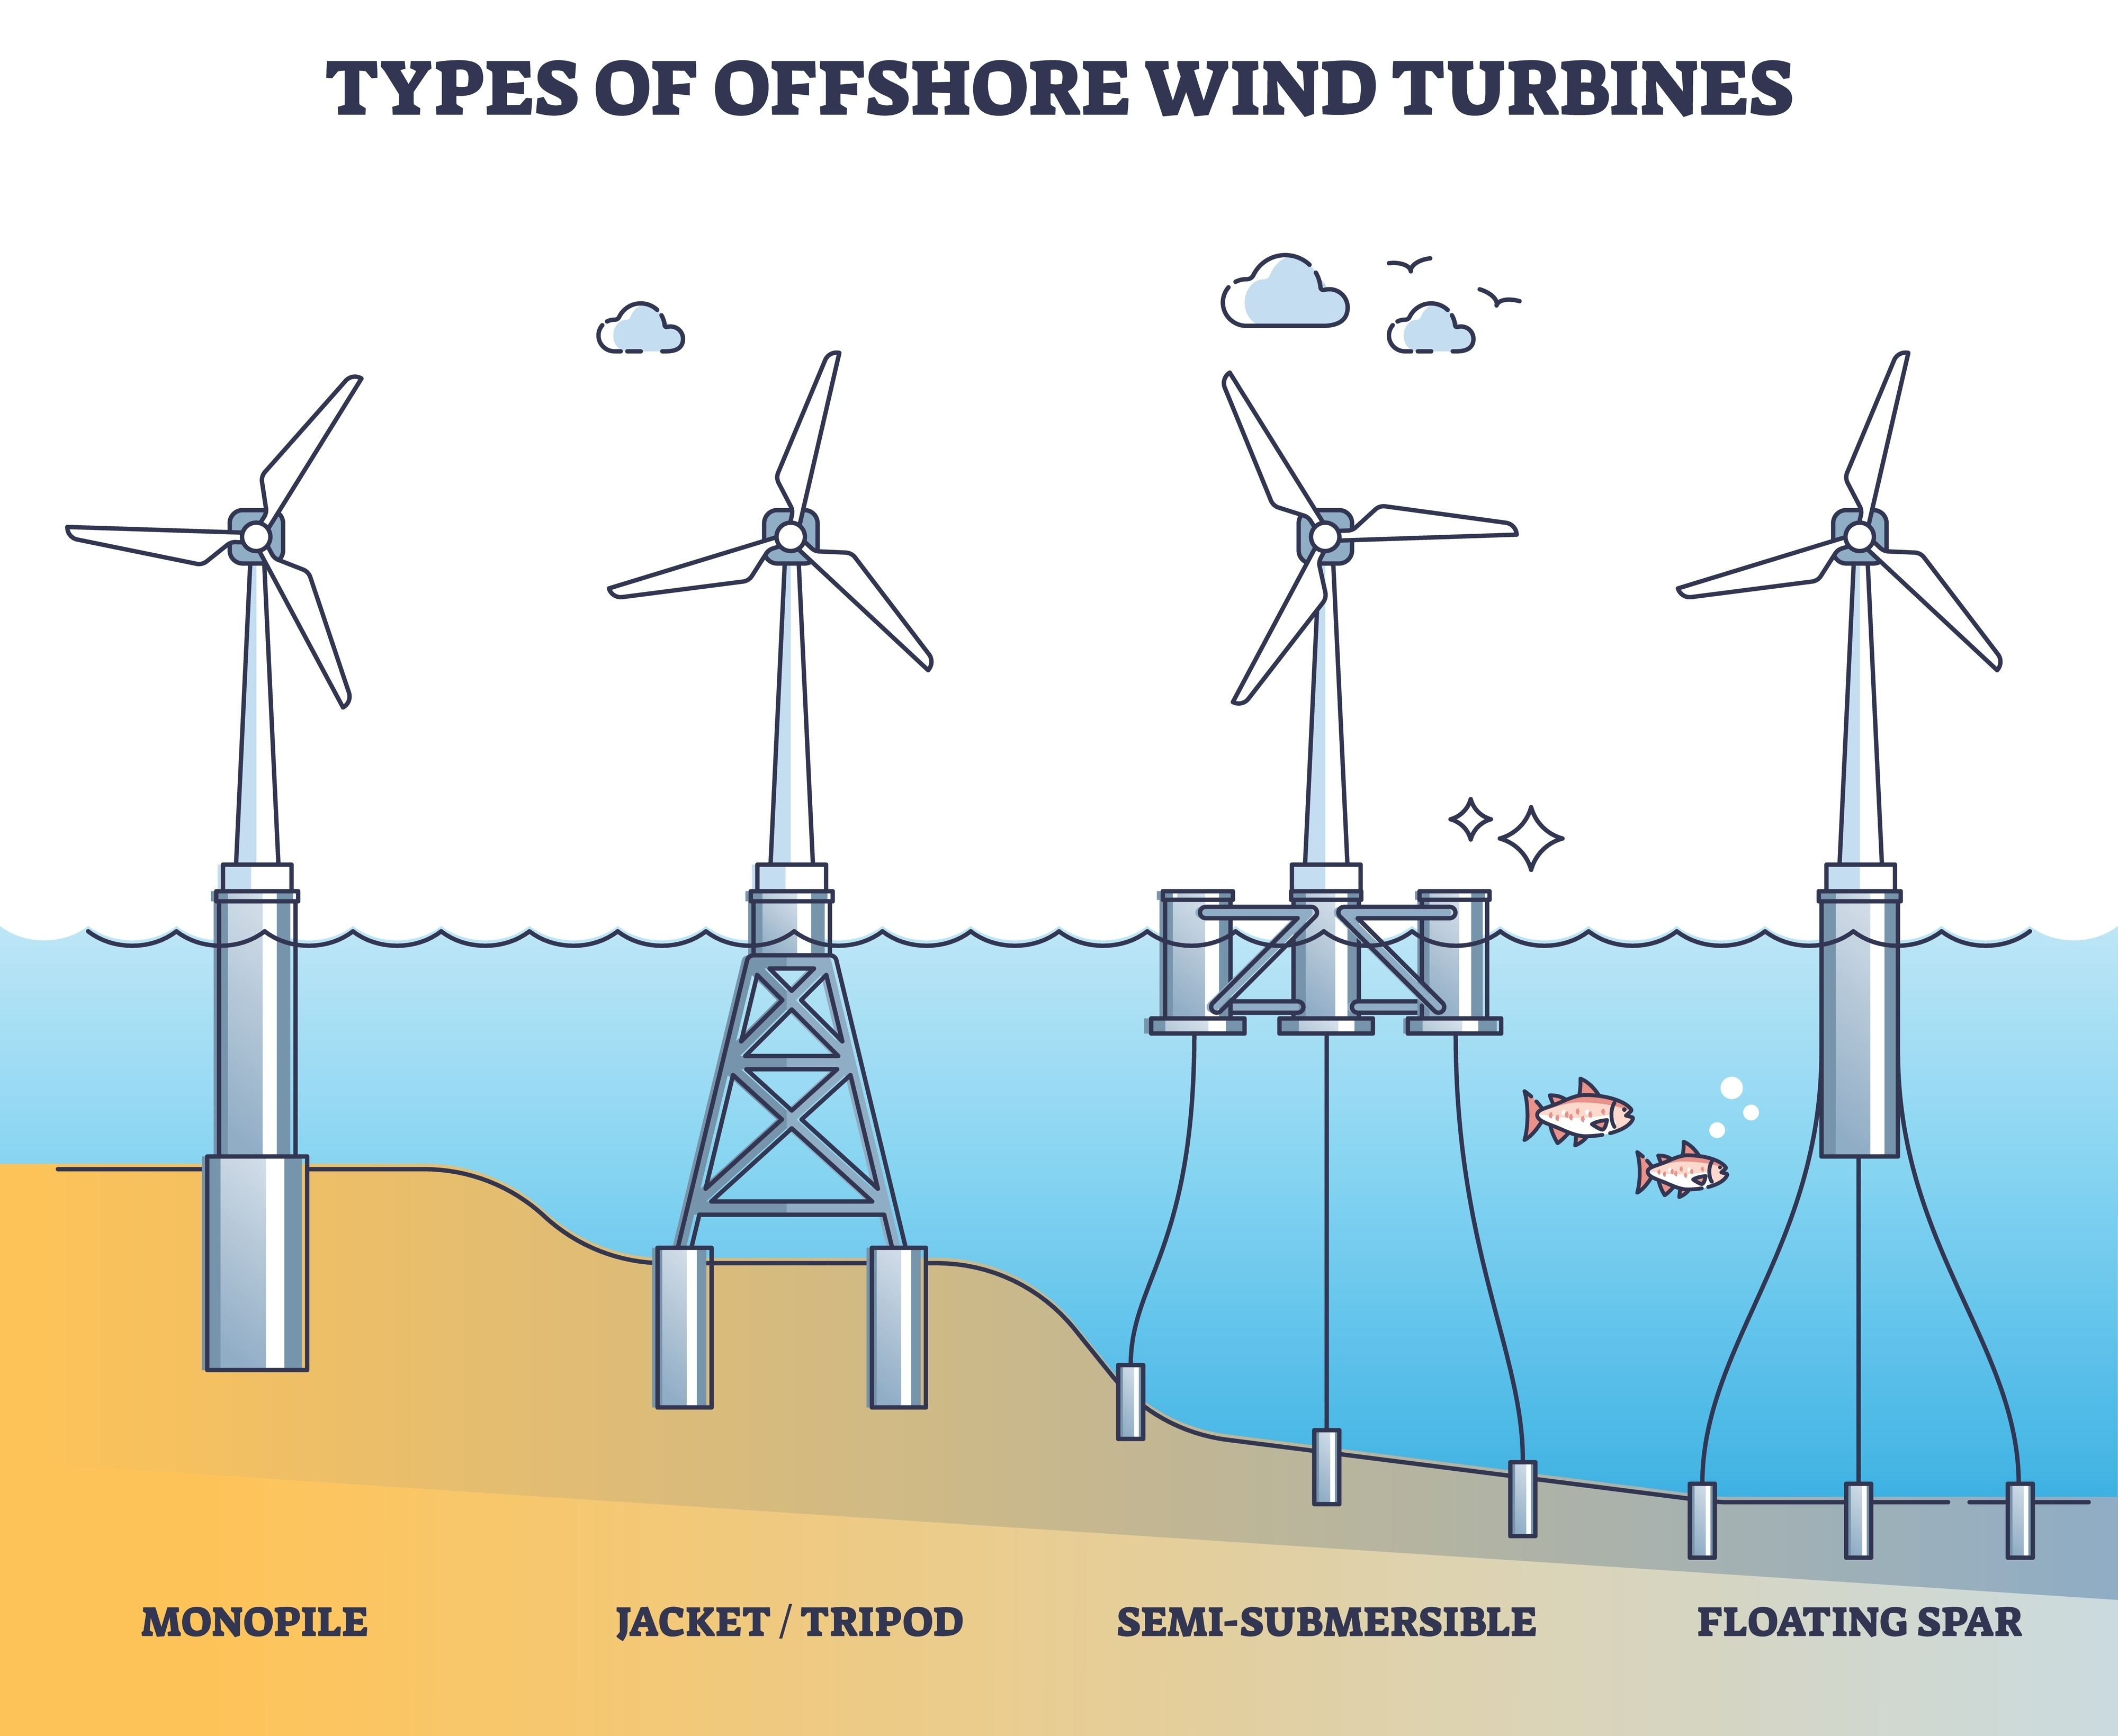 Onsagers offshore wind